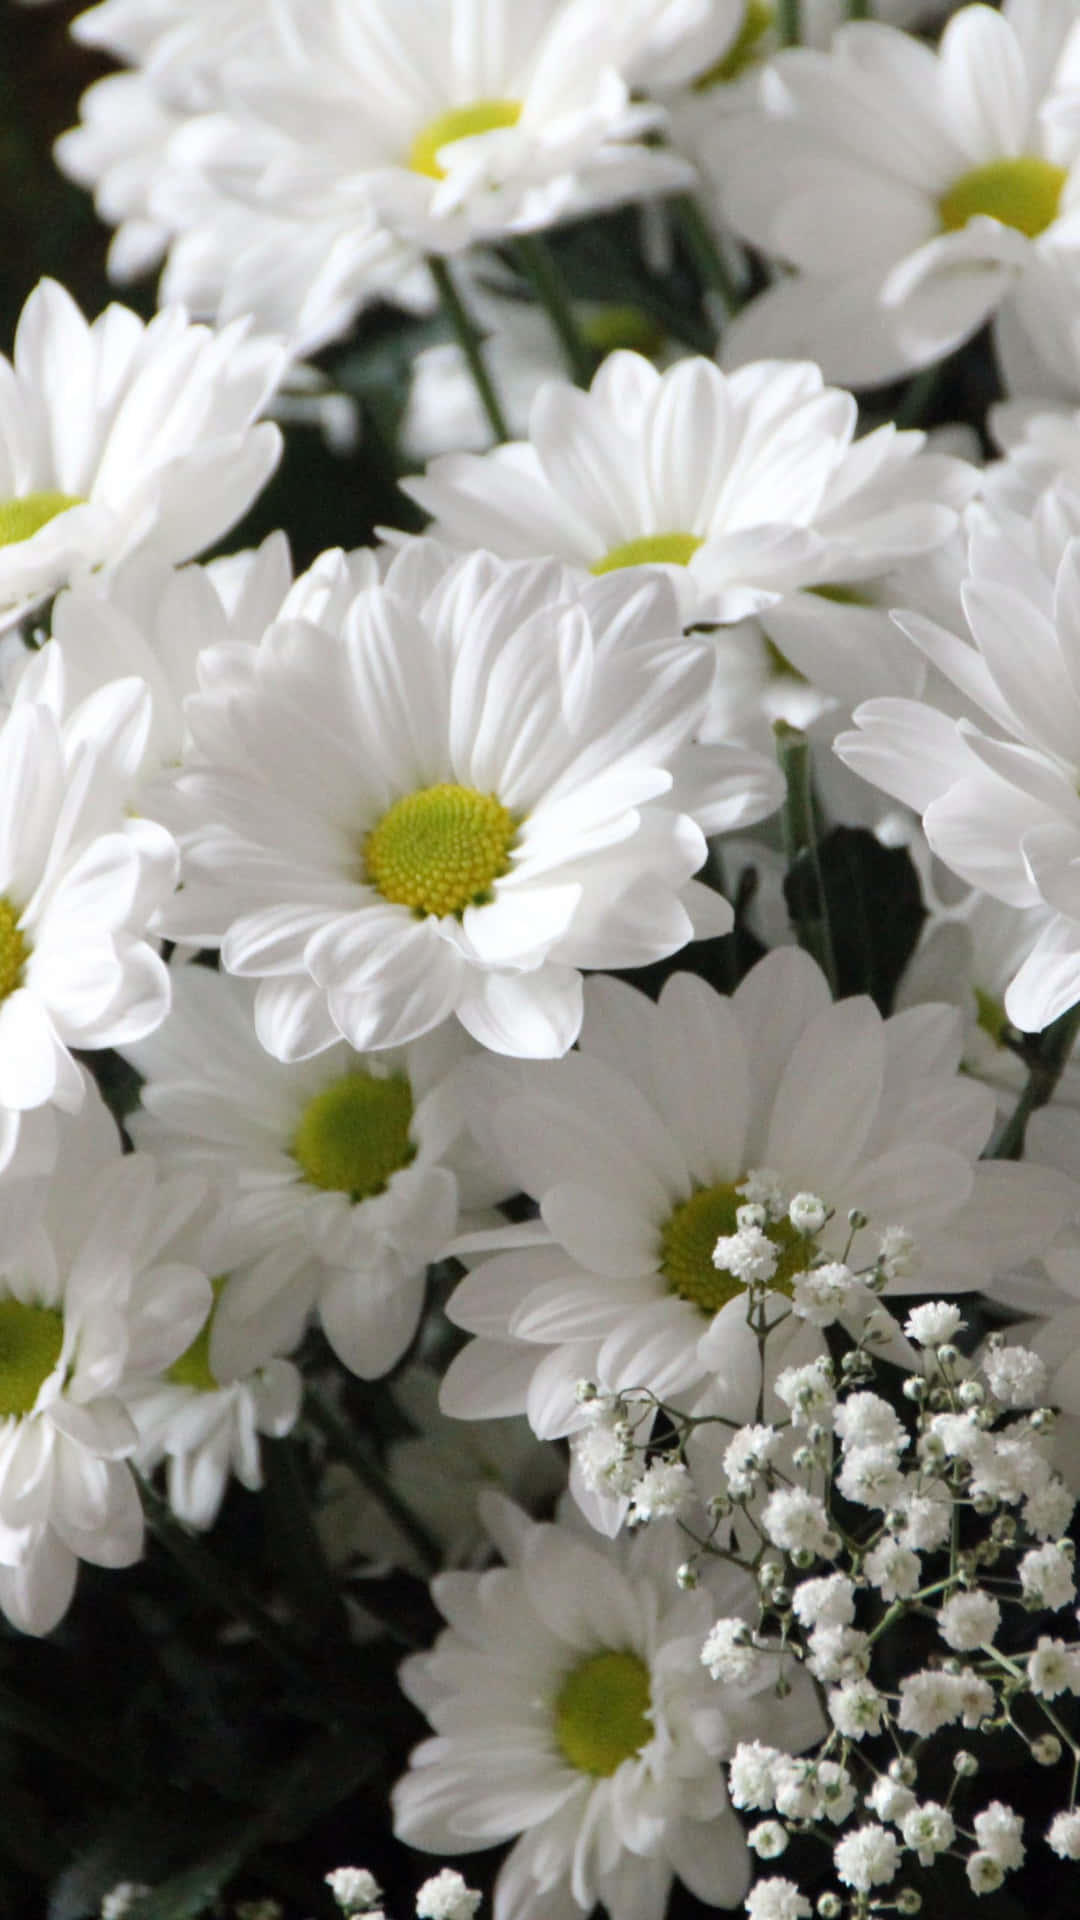 Spring White Android Daisies Background